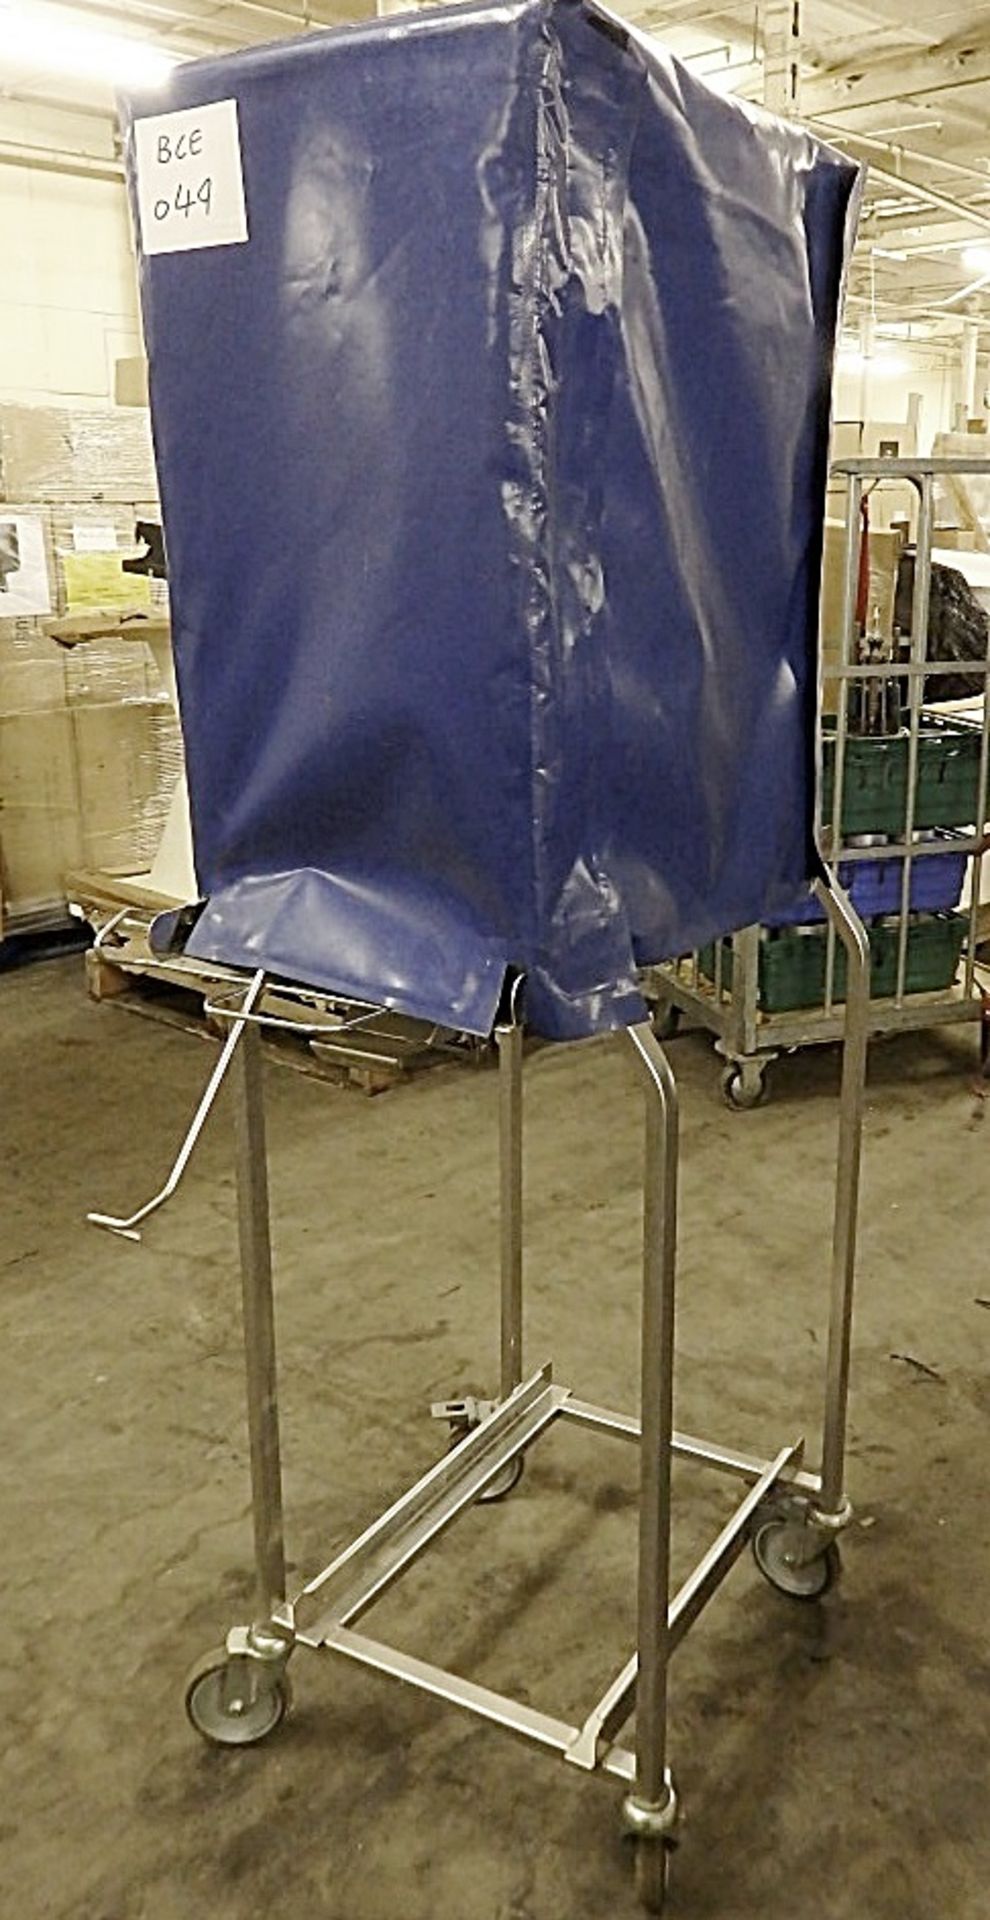 1 x Stainless Steel Plate Rack / Trolley With Thermal Cover - Only Used Once Before - 31 Plate - Image 5 of 5